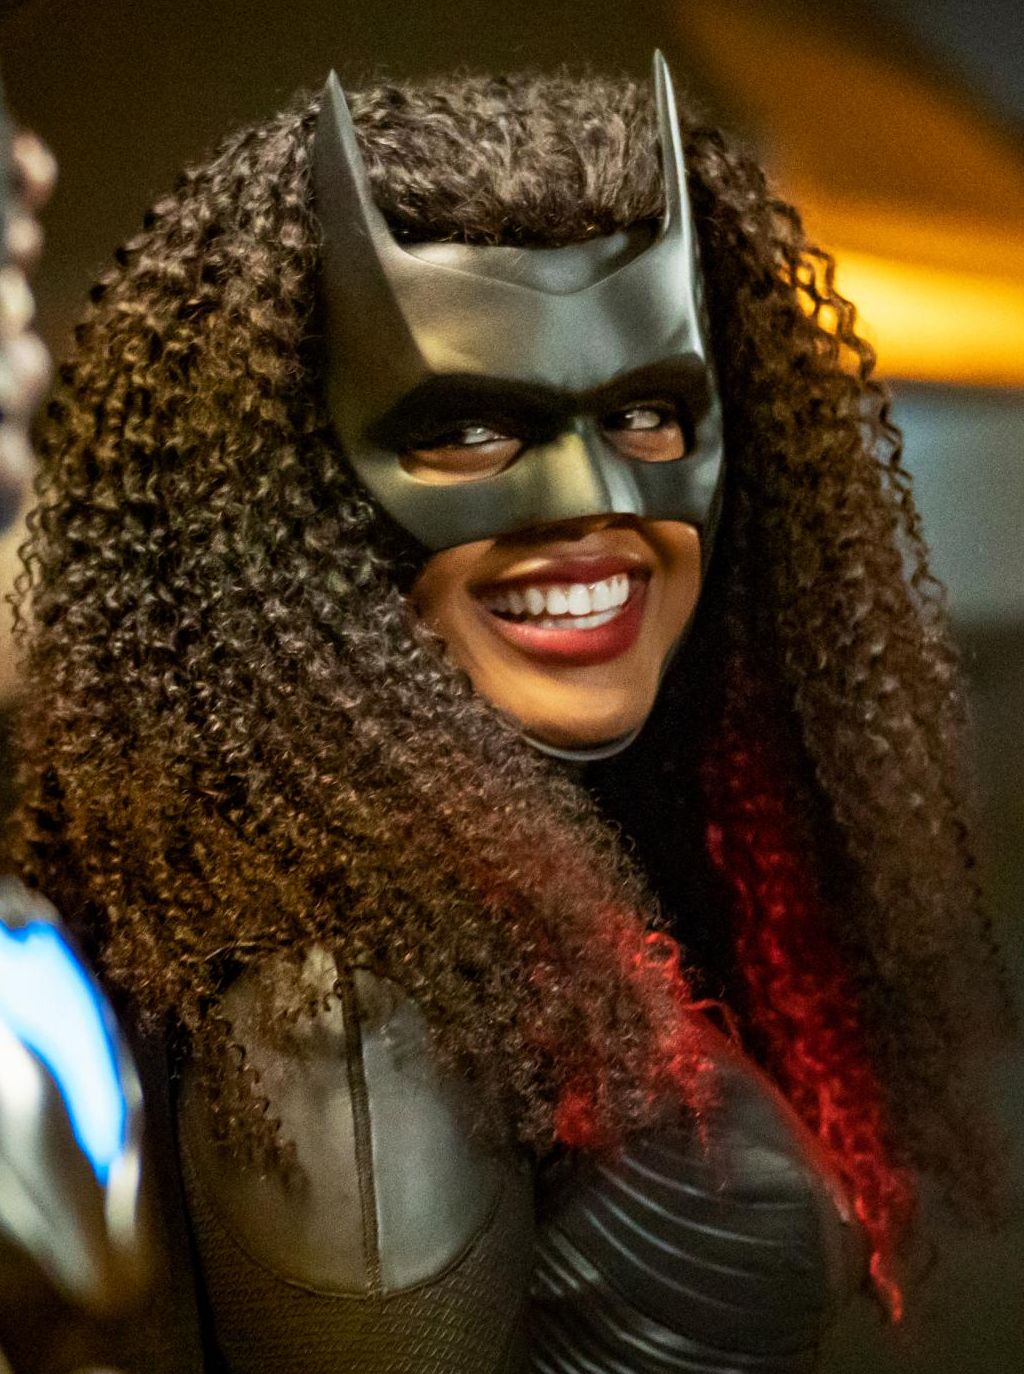 A smiling Javicia Leslie as Batwoman wearing her trademark bat mask and black action hero suit